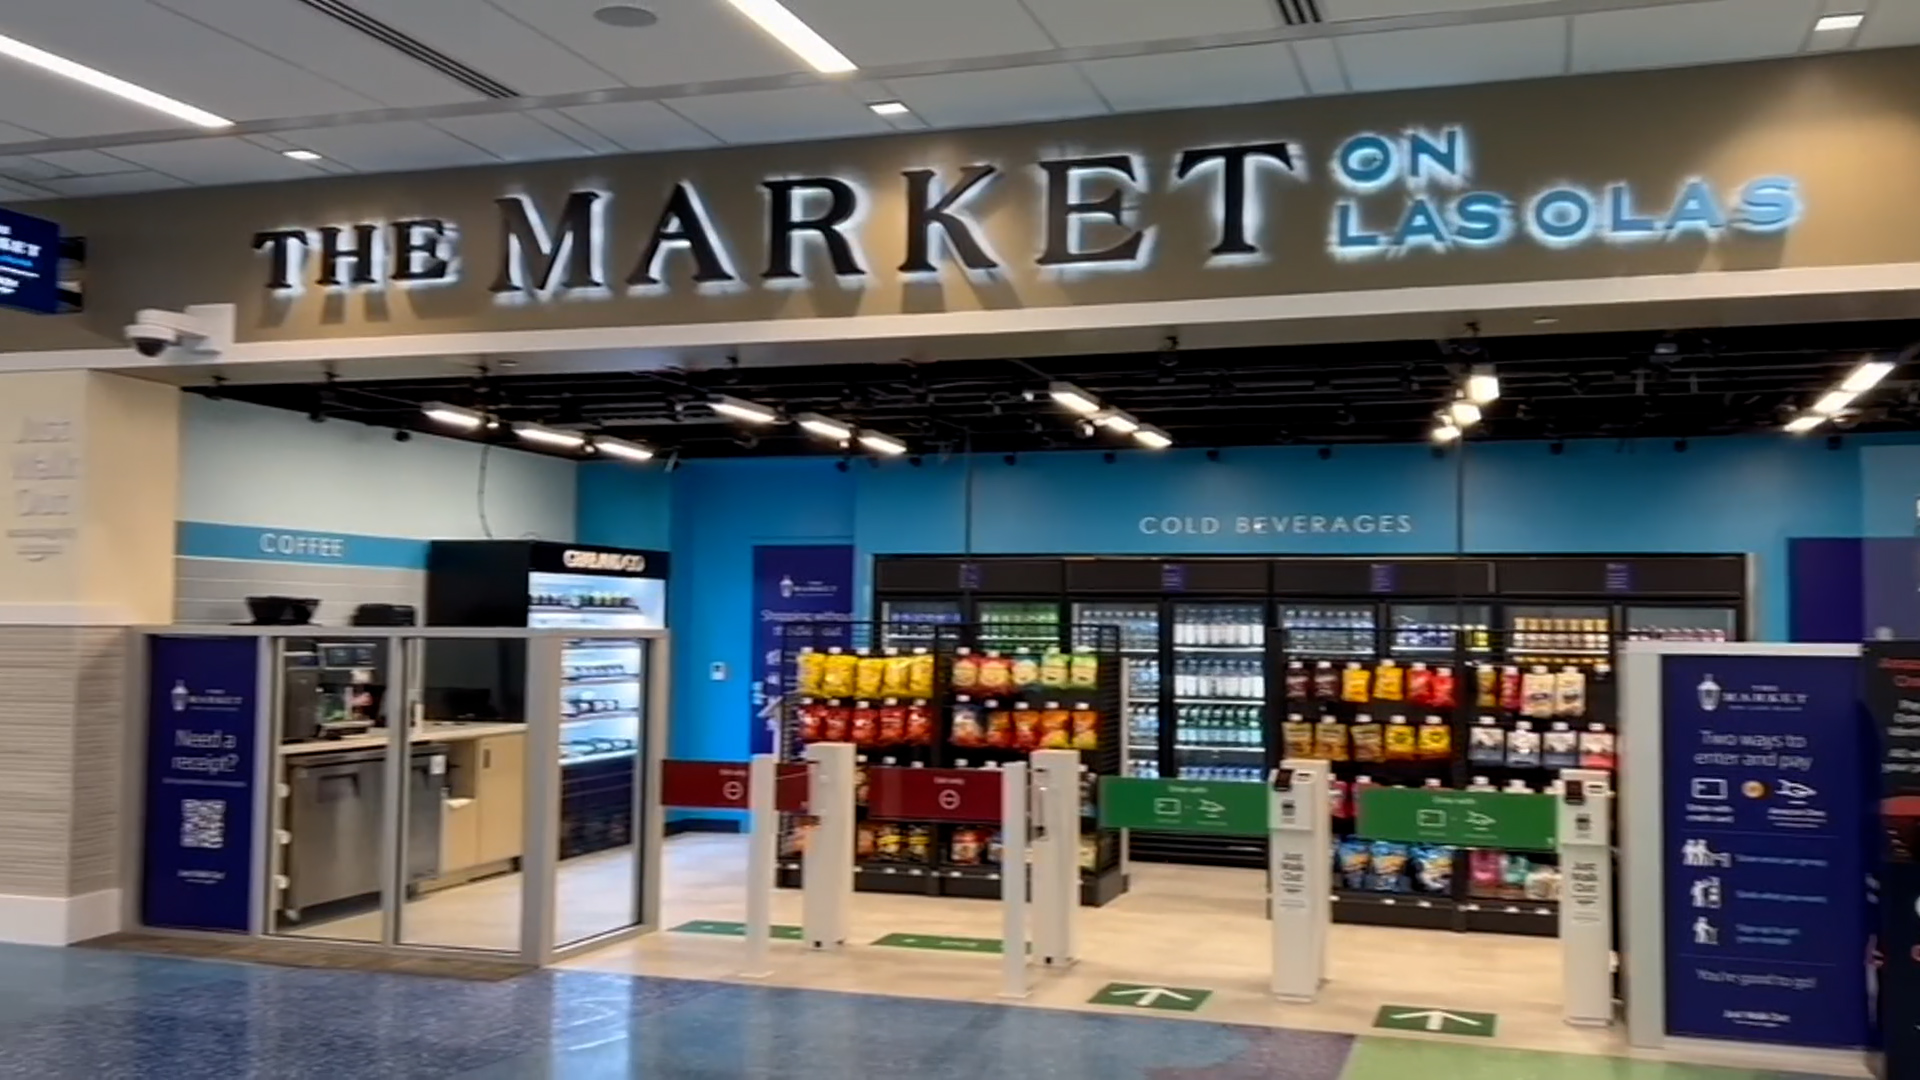 NBC six South Florida Reports: Fort Lauderdale Airport Unveils Cutting-Edge Shop With Amazon Technologies, Eliminating Checkout